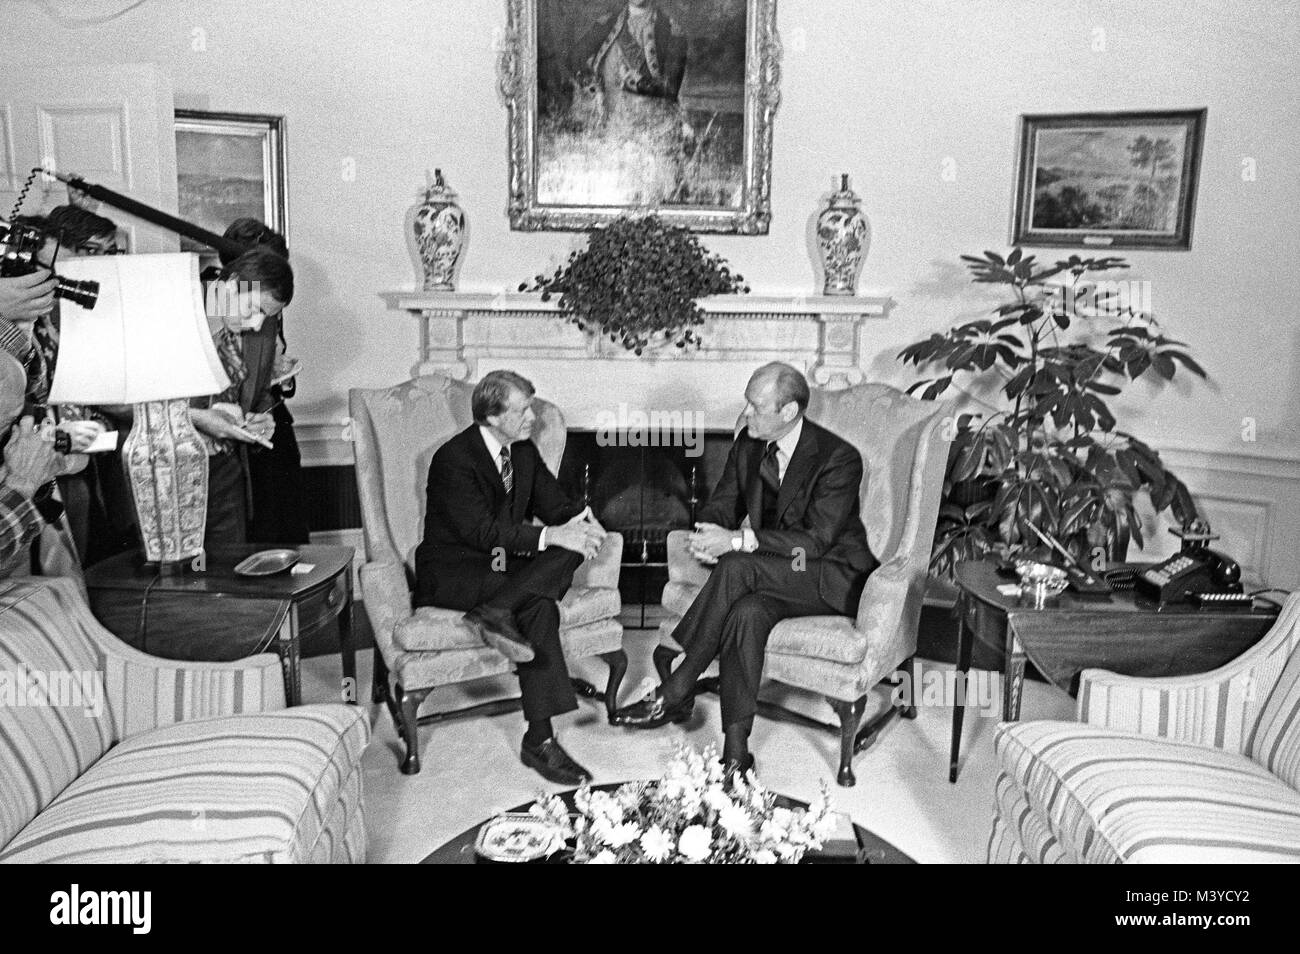 Washington, District of Columbia, USA. 22nd Nov, 1976. United States President Gerald R. Ford, right, meets U.S. President Elect Jimmy Carter, left, in the Oval Office of the White House in Washington, DC to discuss the transition on November 22, 1976. This is the first meeting between the two men since the Presidential debates during the campaign.Credit: Benjamin E. ''Gene'' Forte/CNP Credit: Benjamin E. ''Gene'' Forte/CNP/ZUMA Wire/Alamy Live News Stock Photo